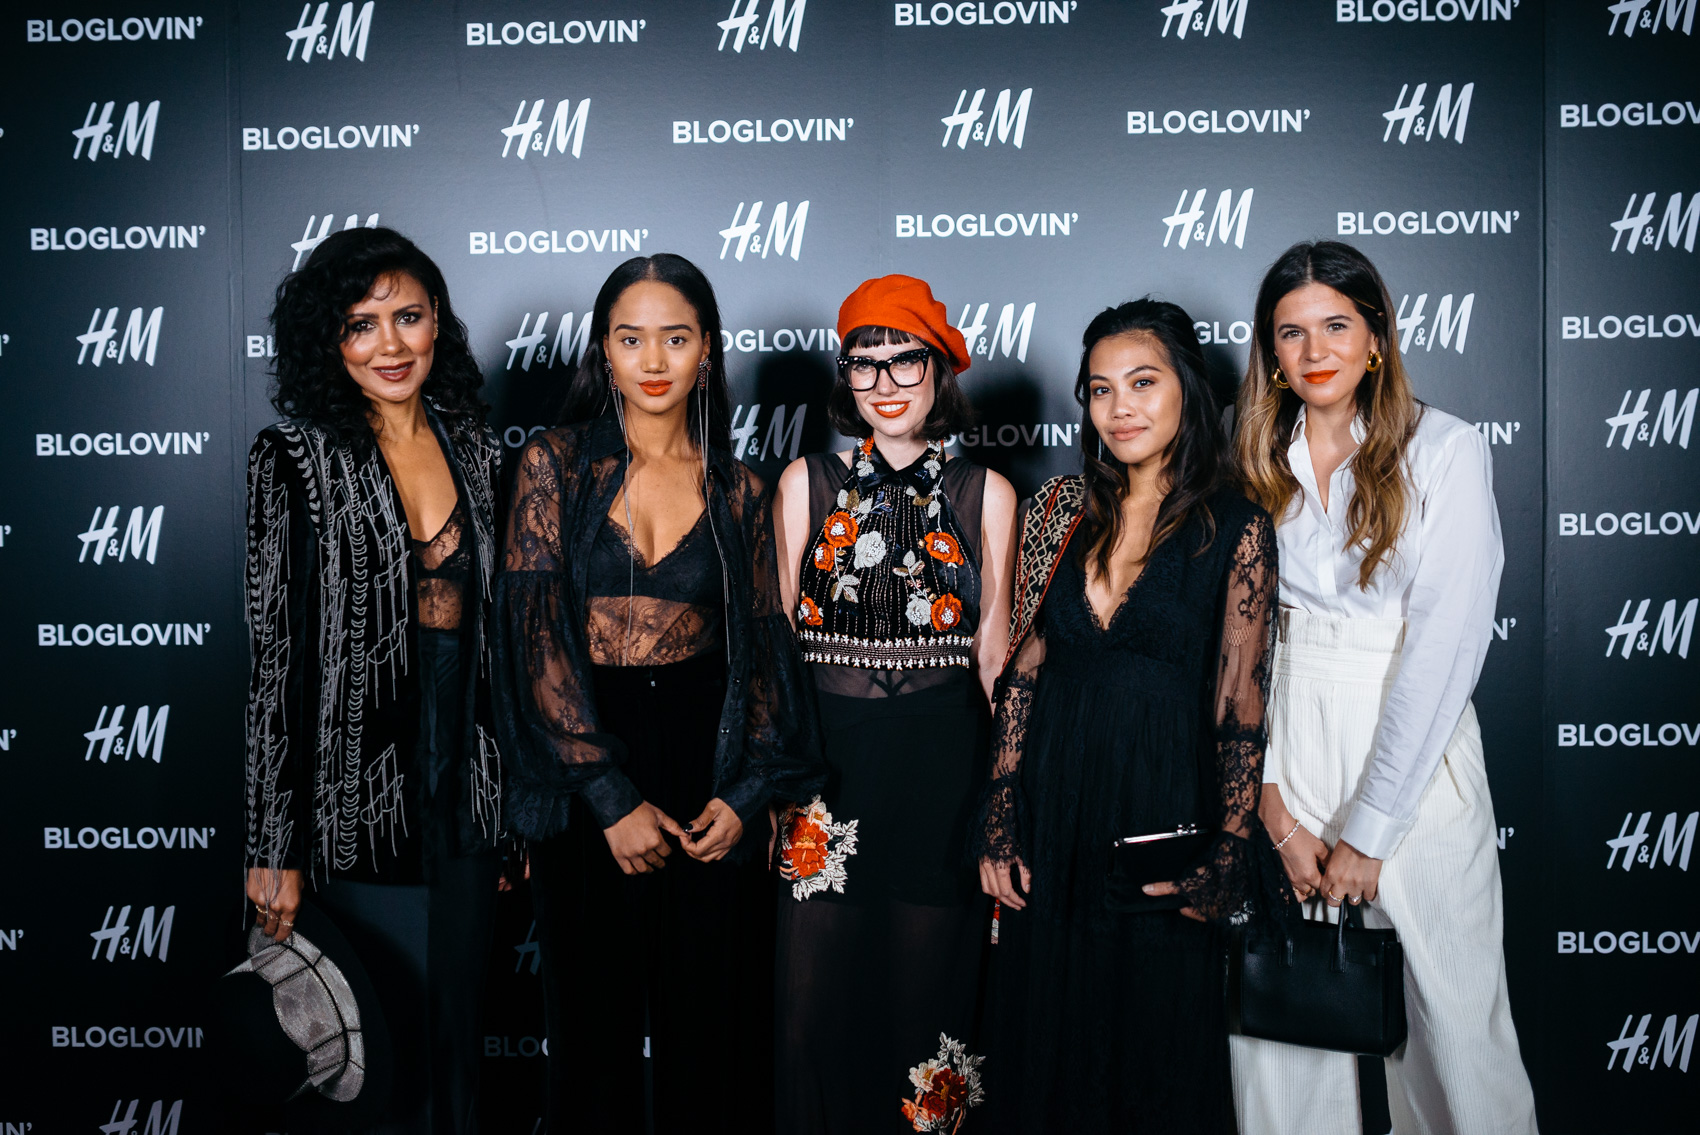 The nominees for Breakthrough Fashion Blogger of the Year for the 2016 Bloglovin' Awards